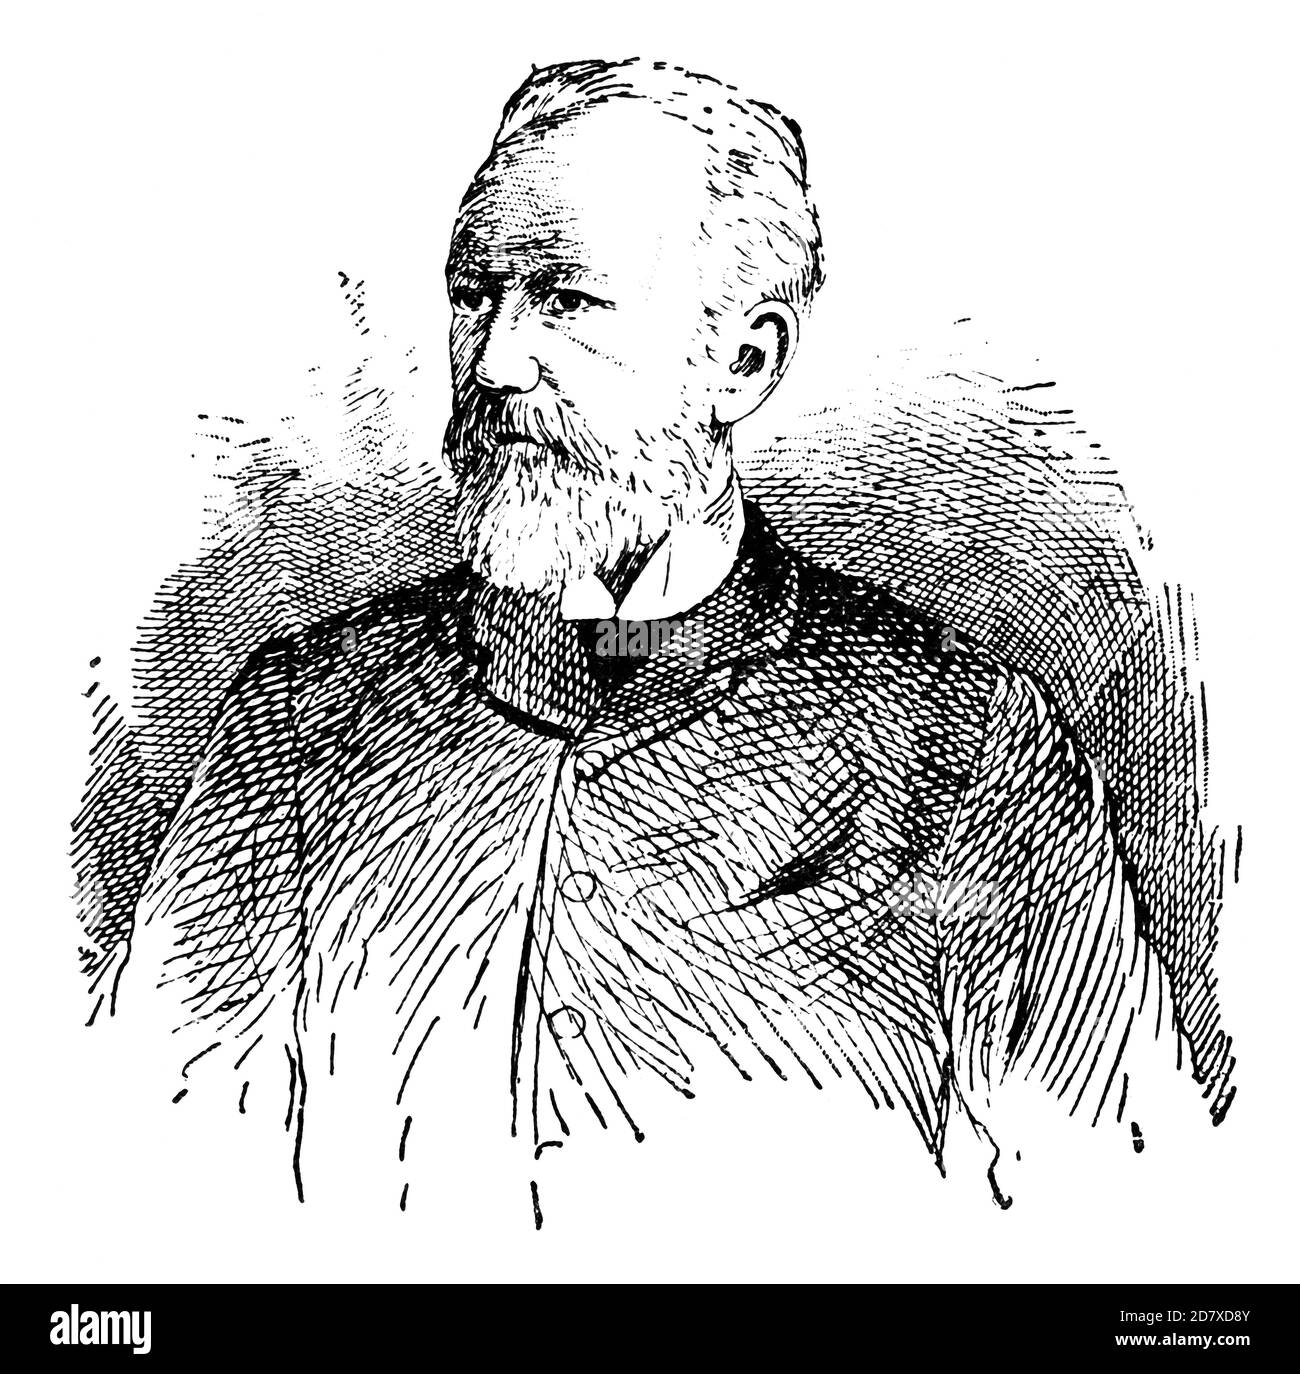 Portrait of Pyotr Ilyich Tchaikovsky - a Russian composer of the Romantic period. Illustration of the 19th century. White background. Stock Photo